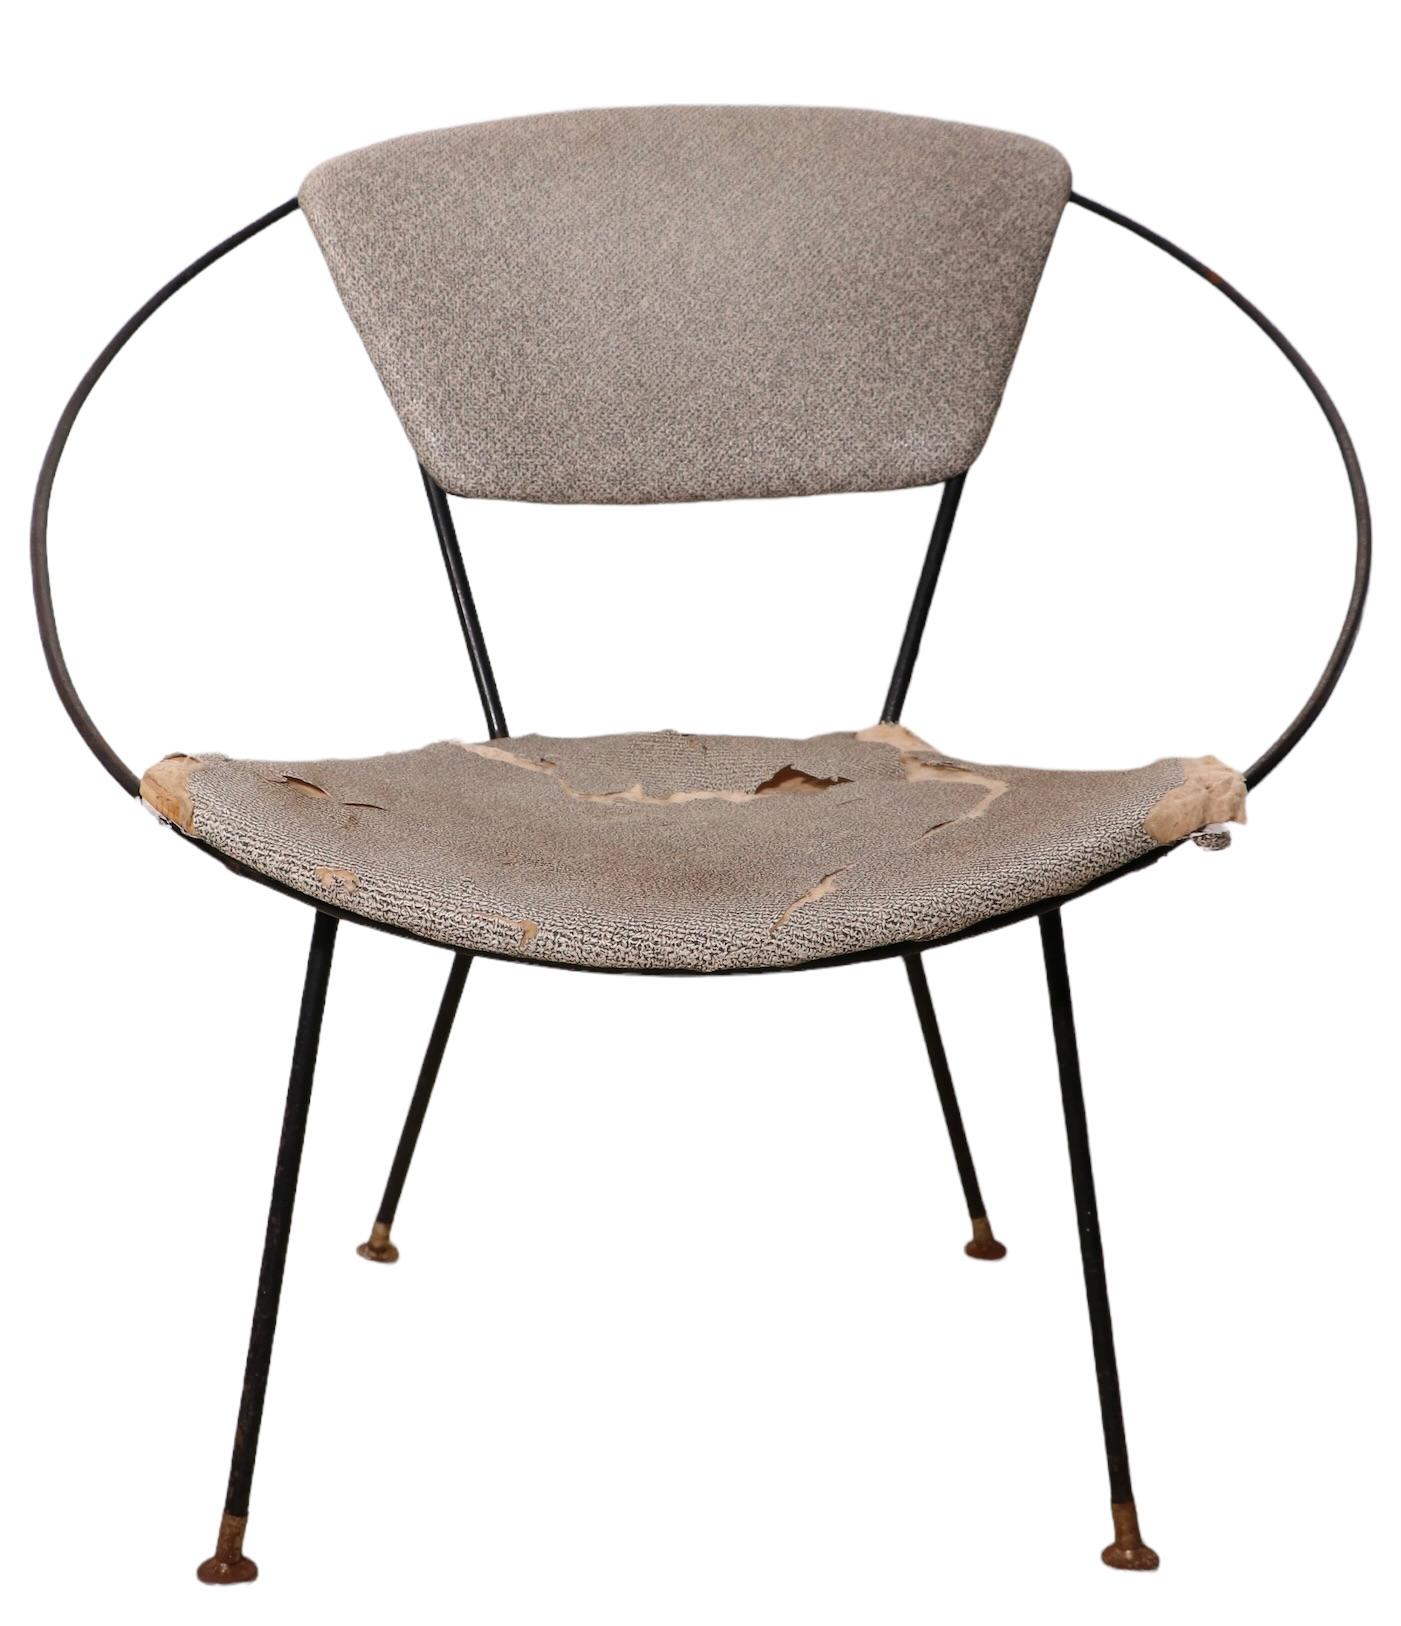 Pr. Wrought Iron Mid Century Hoop Chairs by John Cicchelli for Riley Wolff 1950s For Sale 3